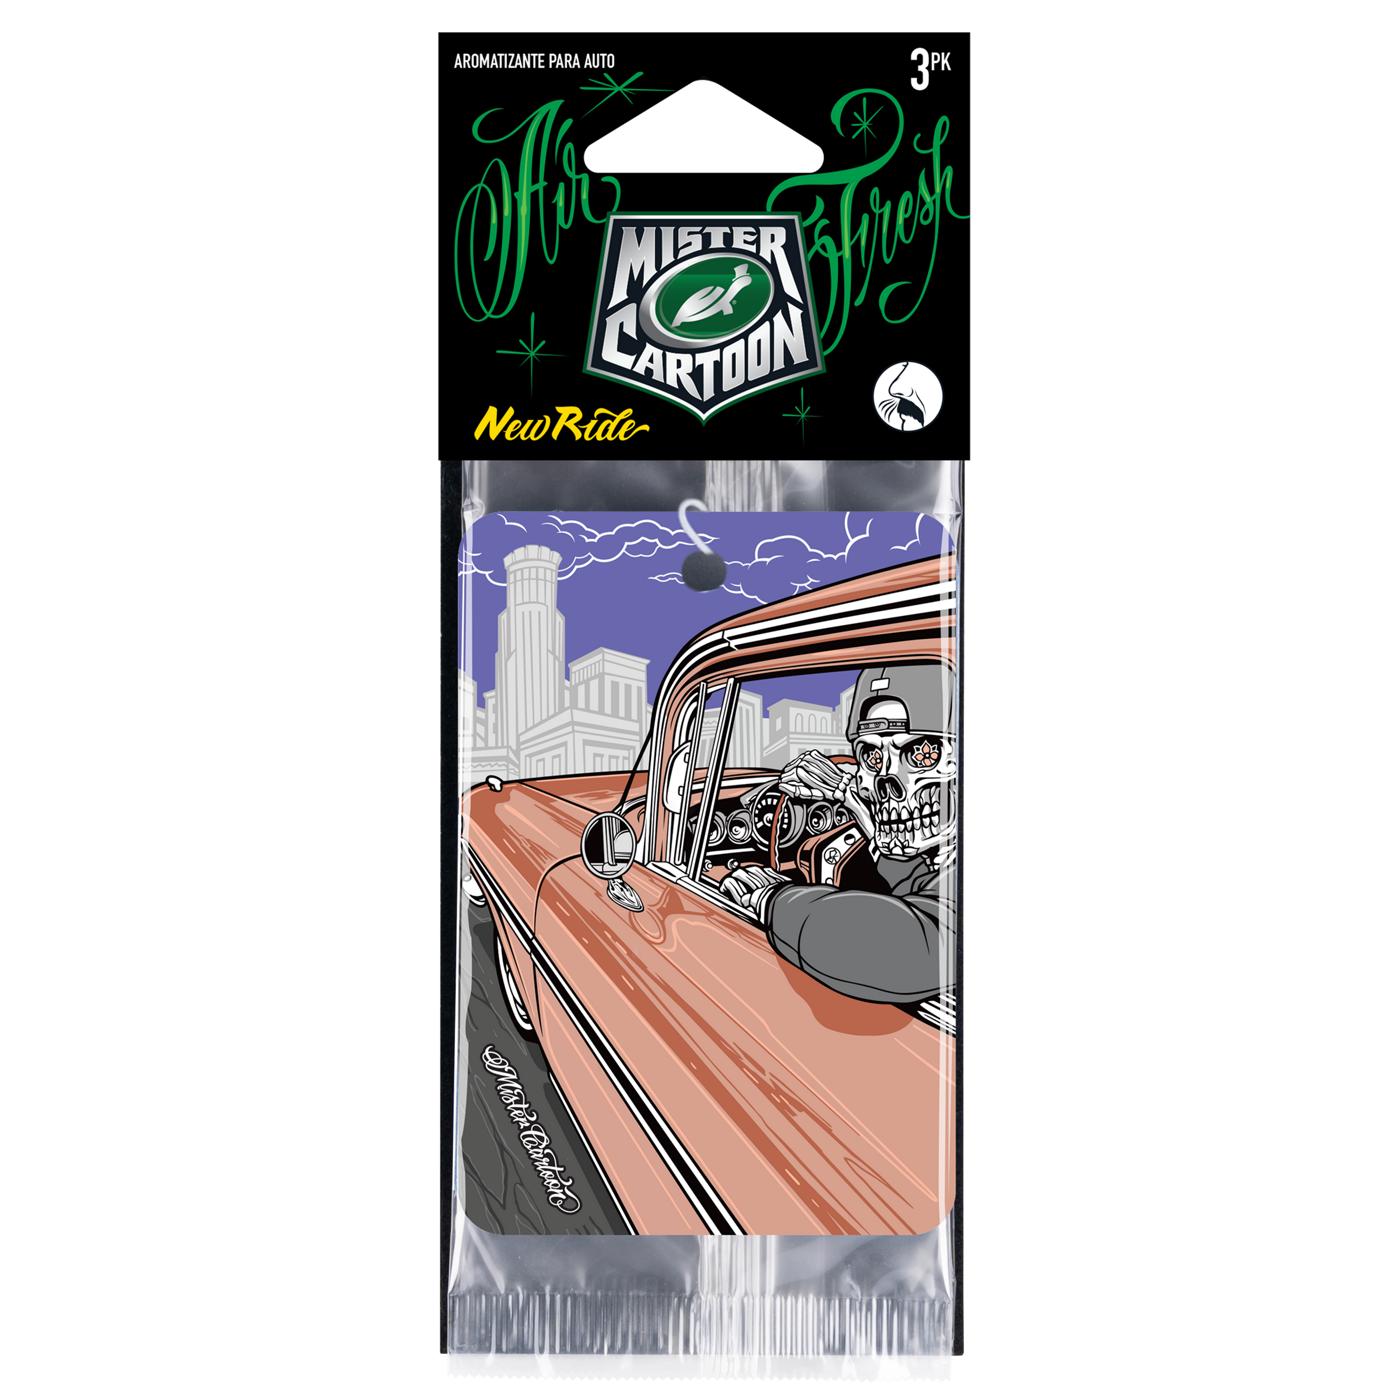 Turtle Wax Mister Cartoon Paper Air Fresheners - New Ride; image 1 of 2